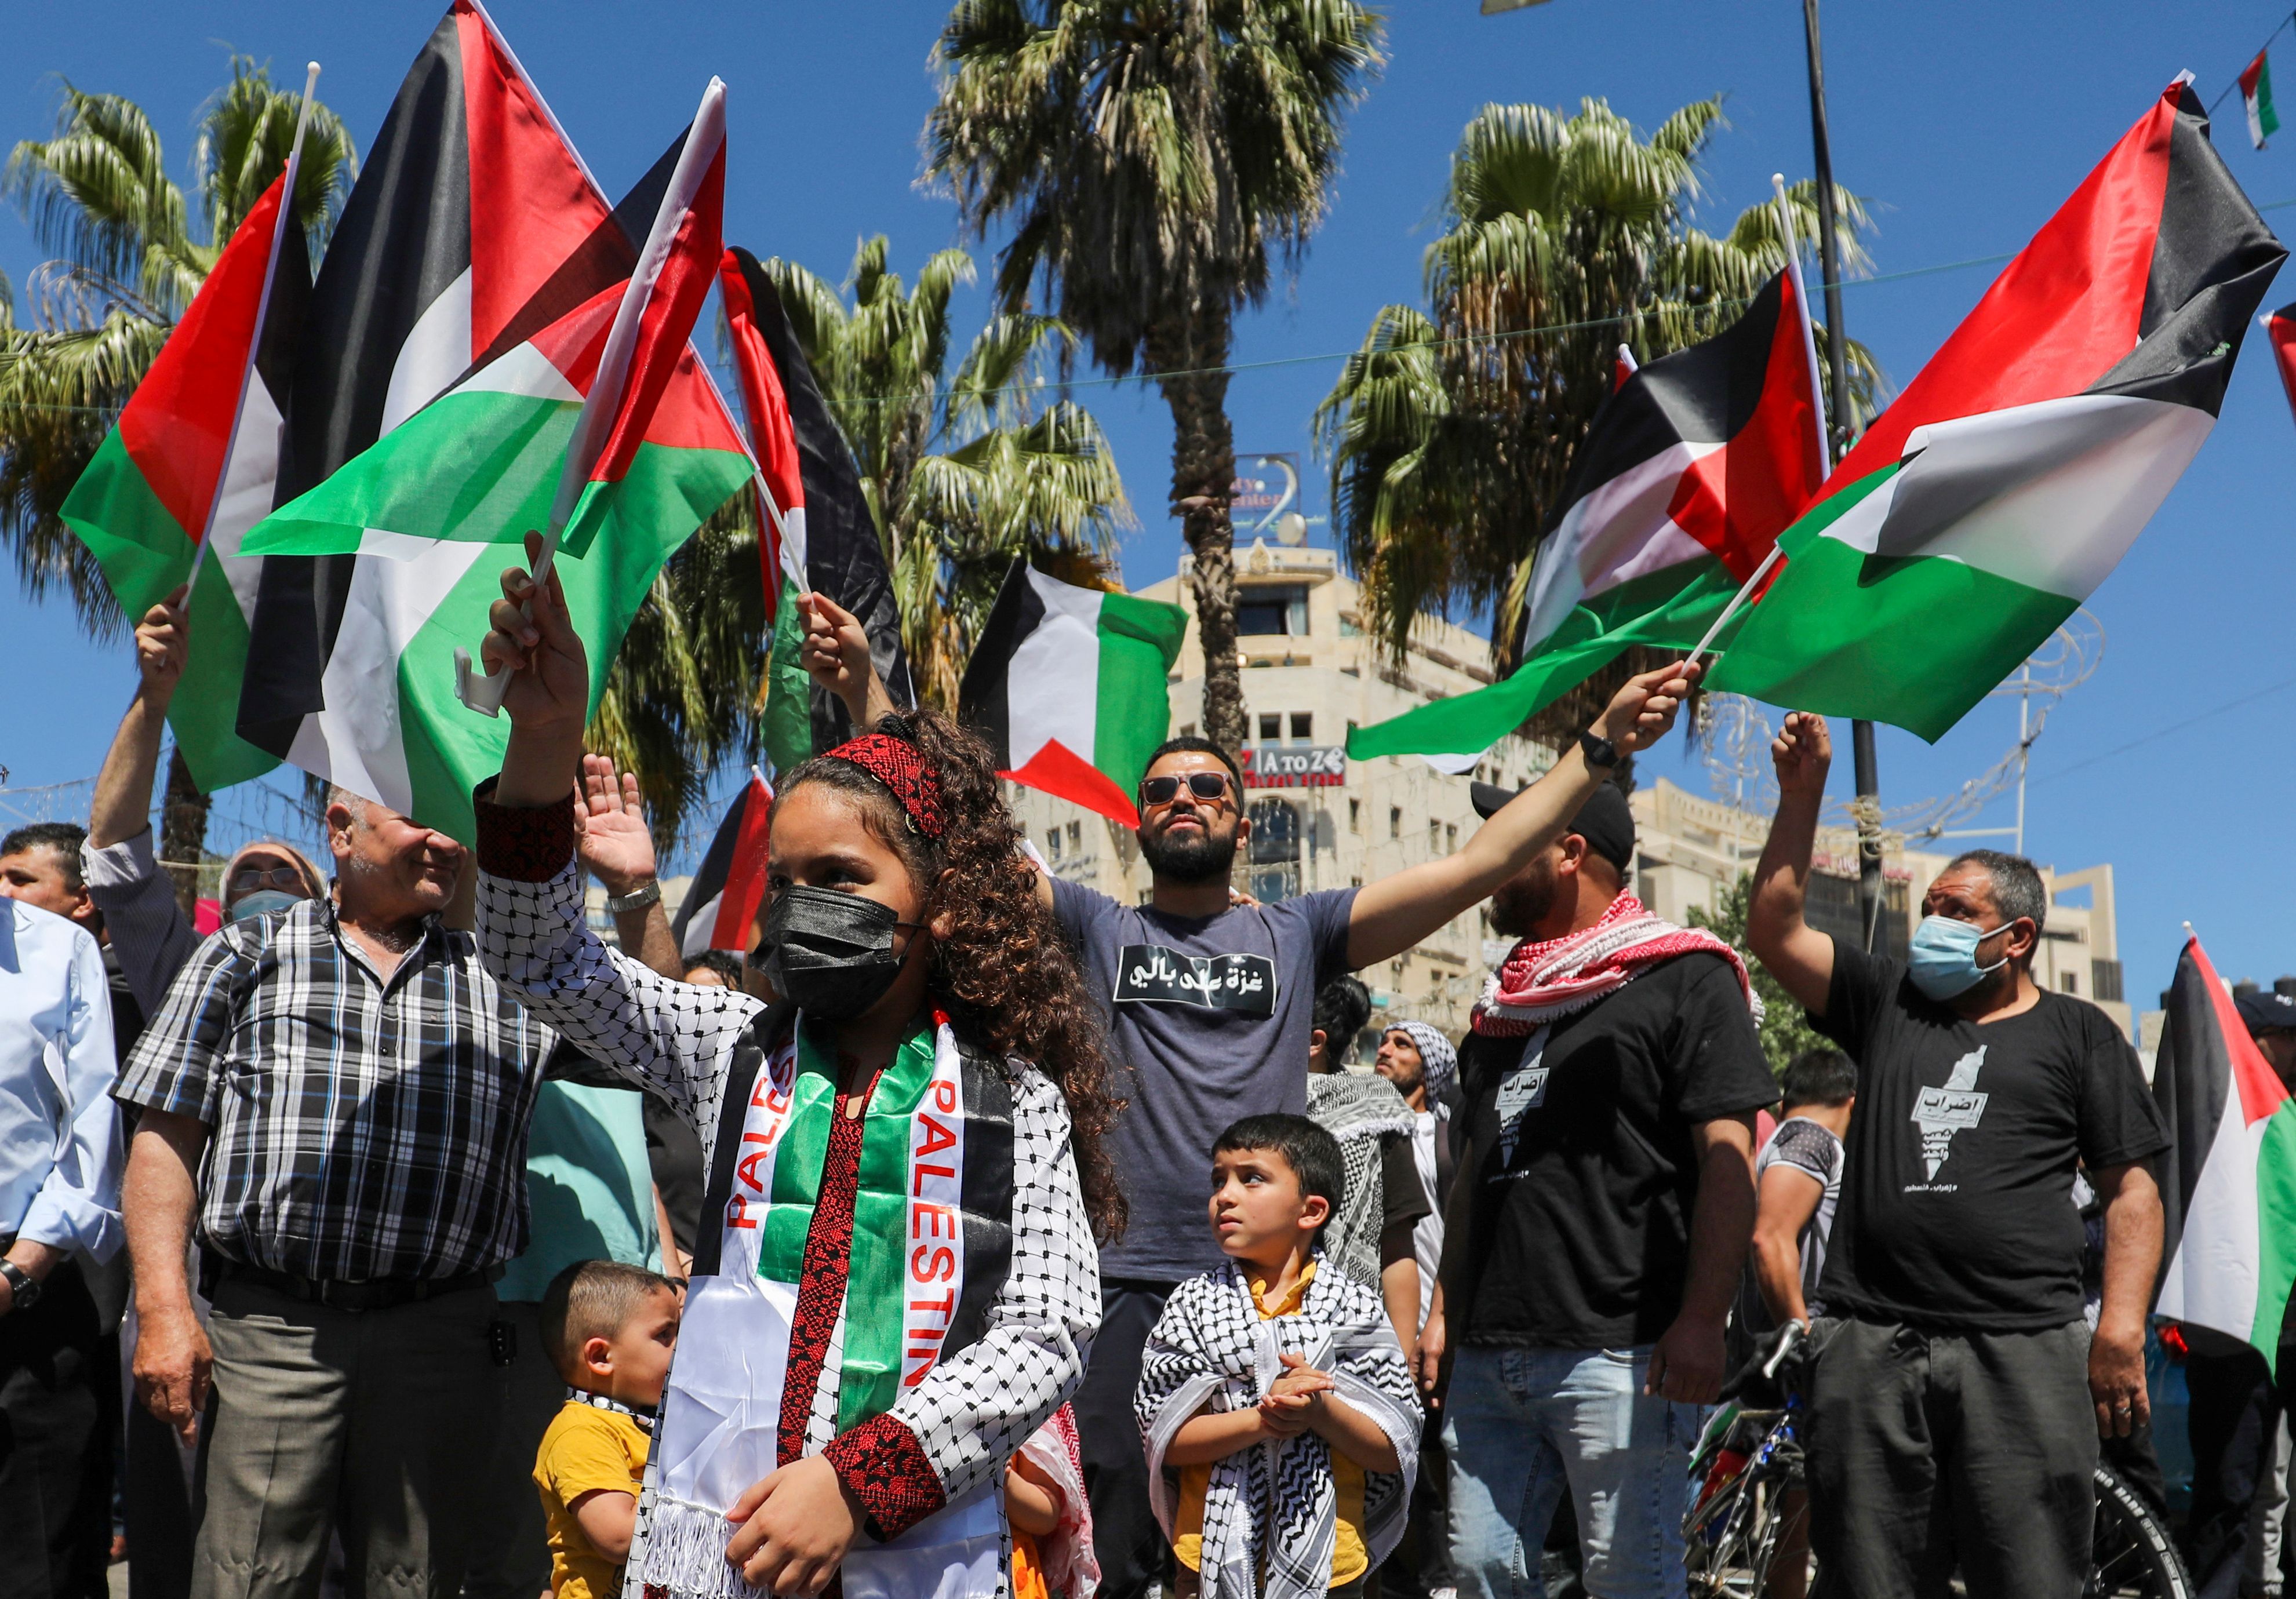 Palestinians demonstrate in the city of Ramallah, in the occupied West Bank, in solidarity with Gaza